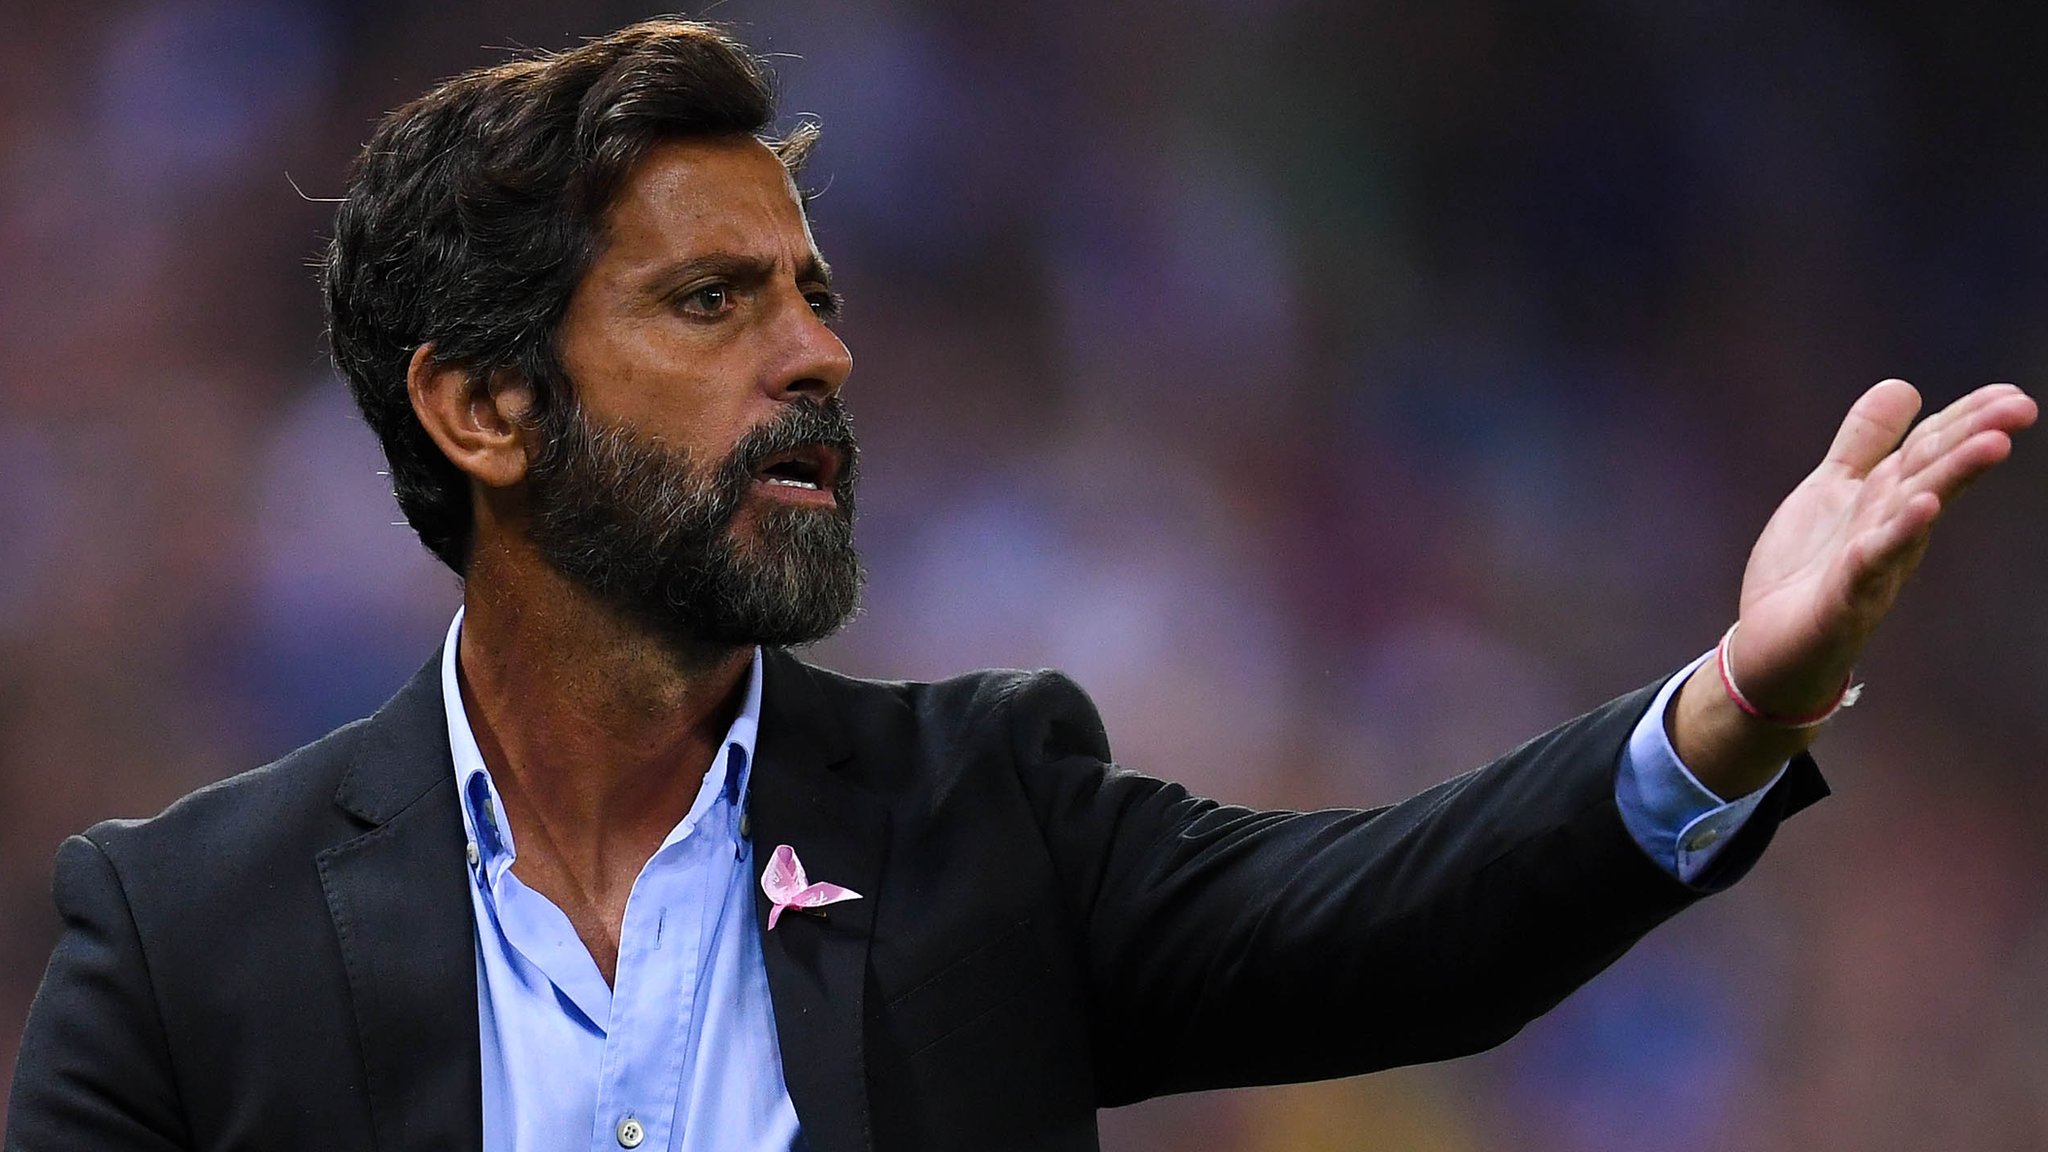 'I am the Espanyol coach and will be' - Flores distances himself from Stoke job